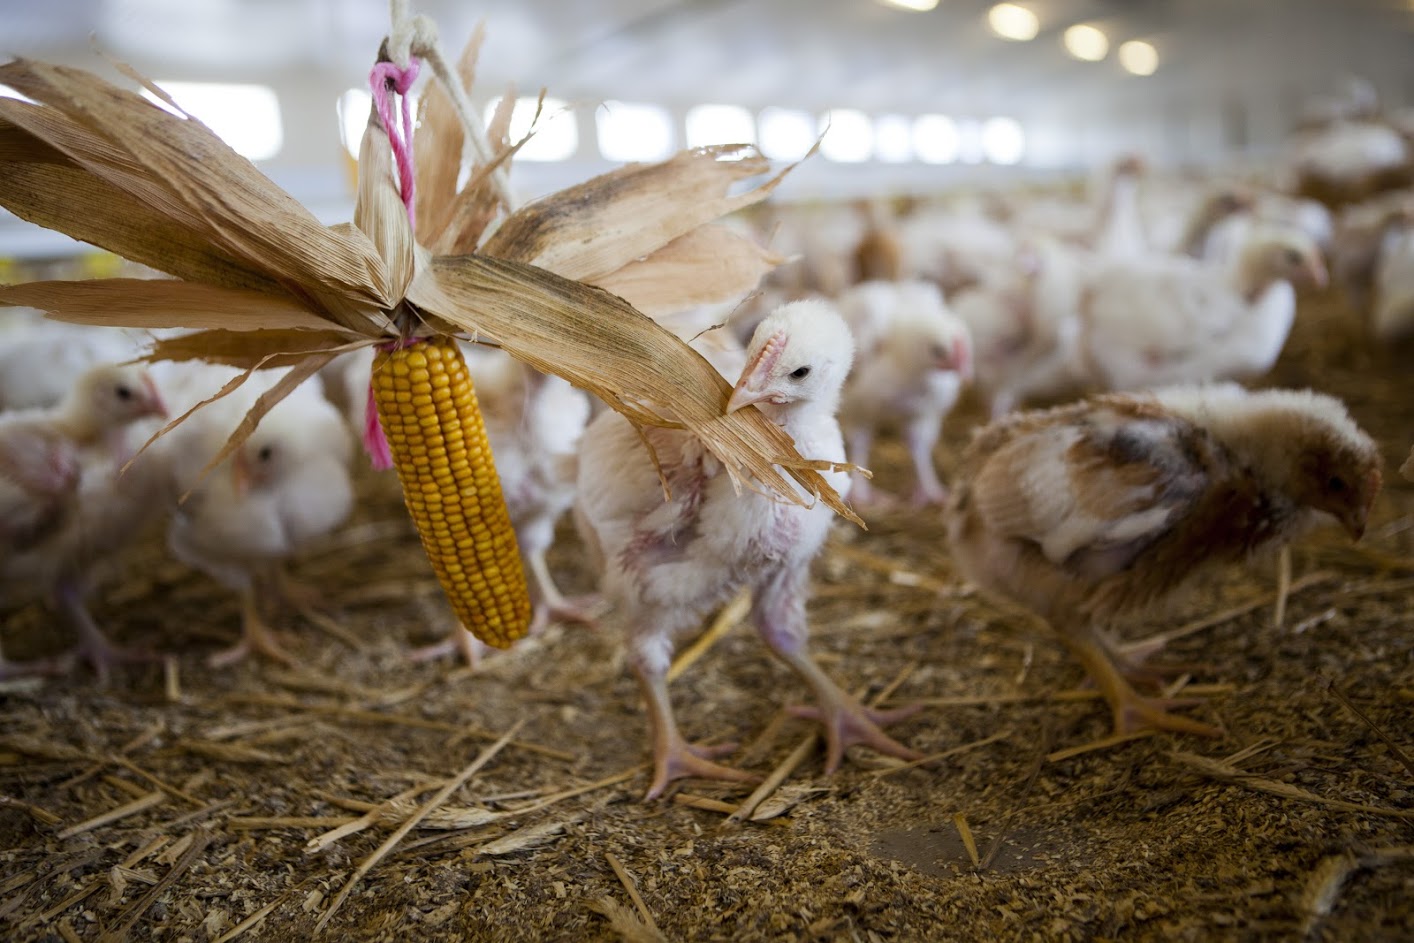 Only a small minority of chickens produced in the UK come from higher welfare farms